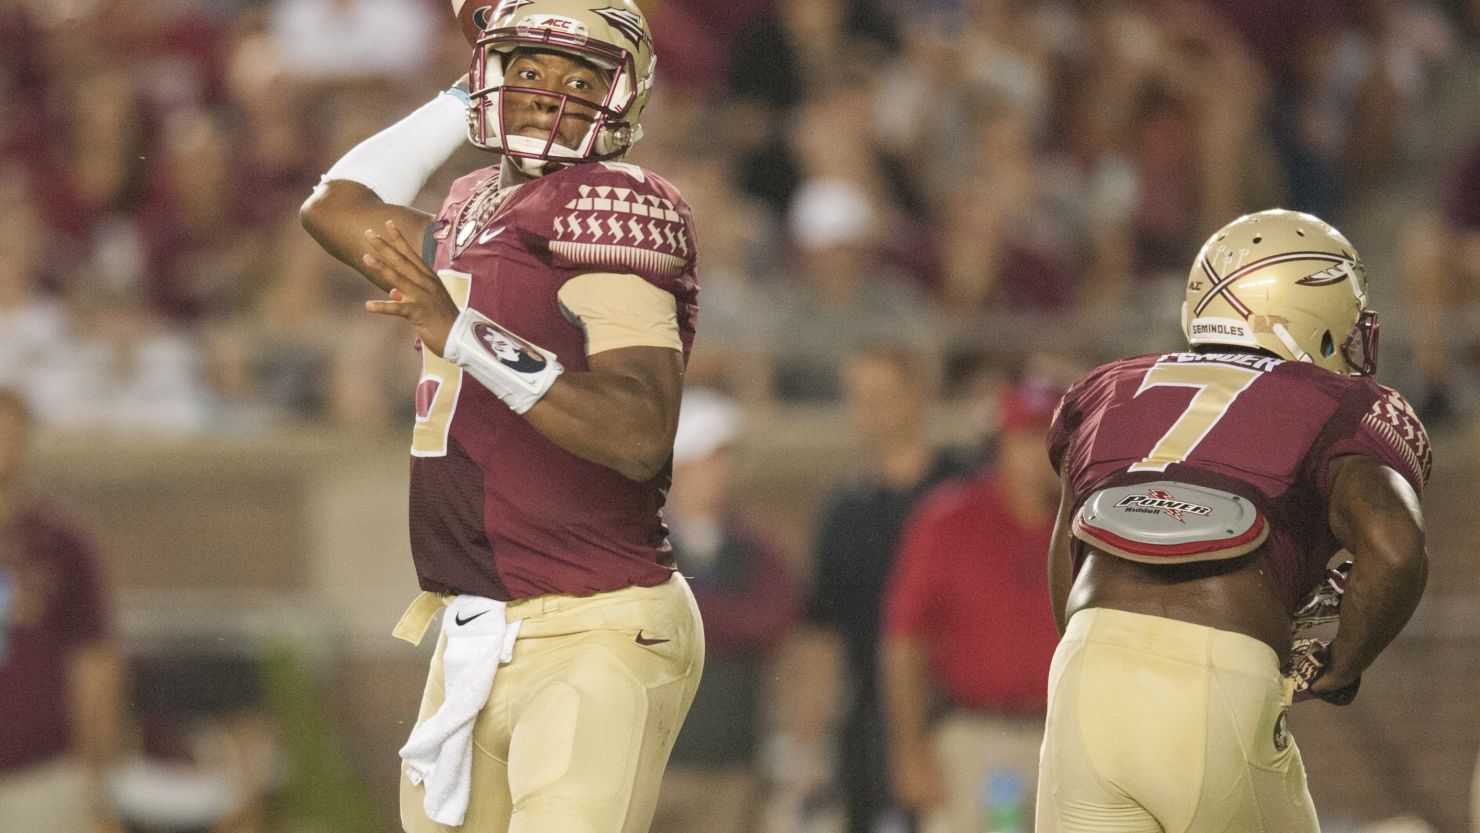 Quarterback Jameis Winston must sit out the entire game against Clemson on Saturday.